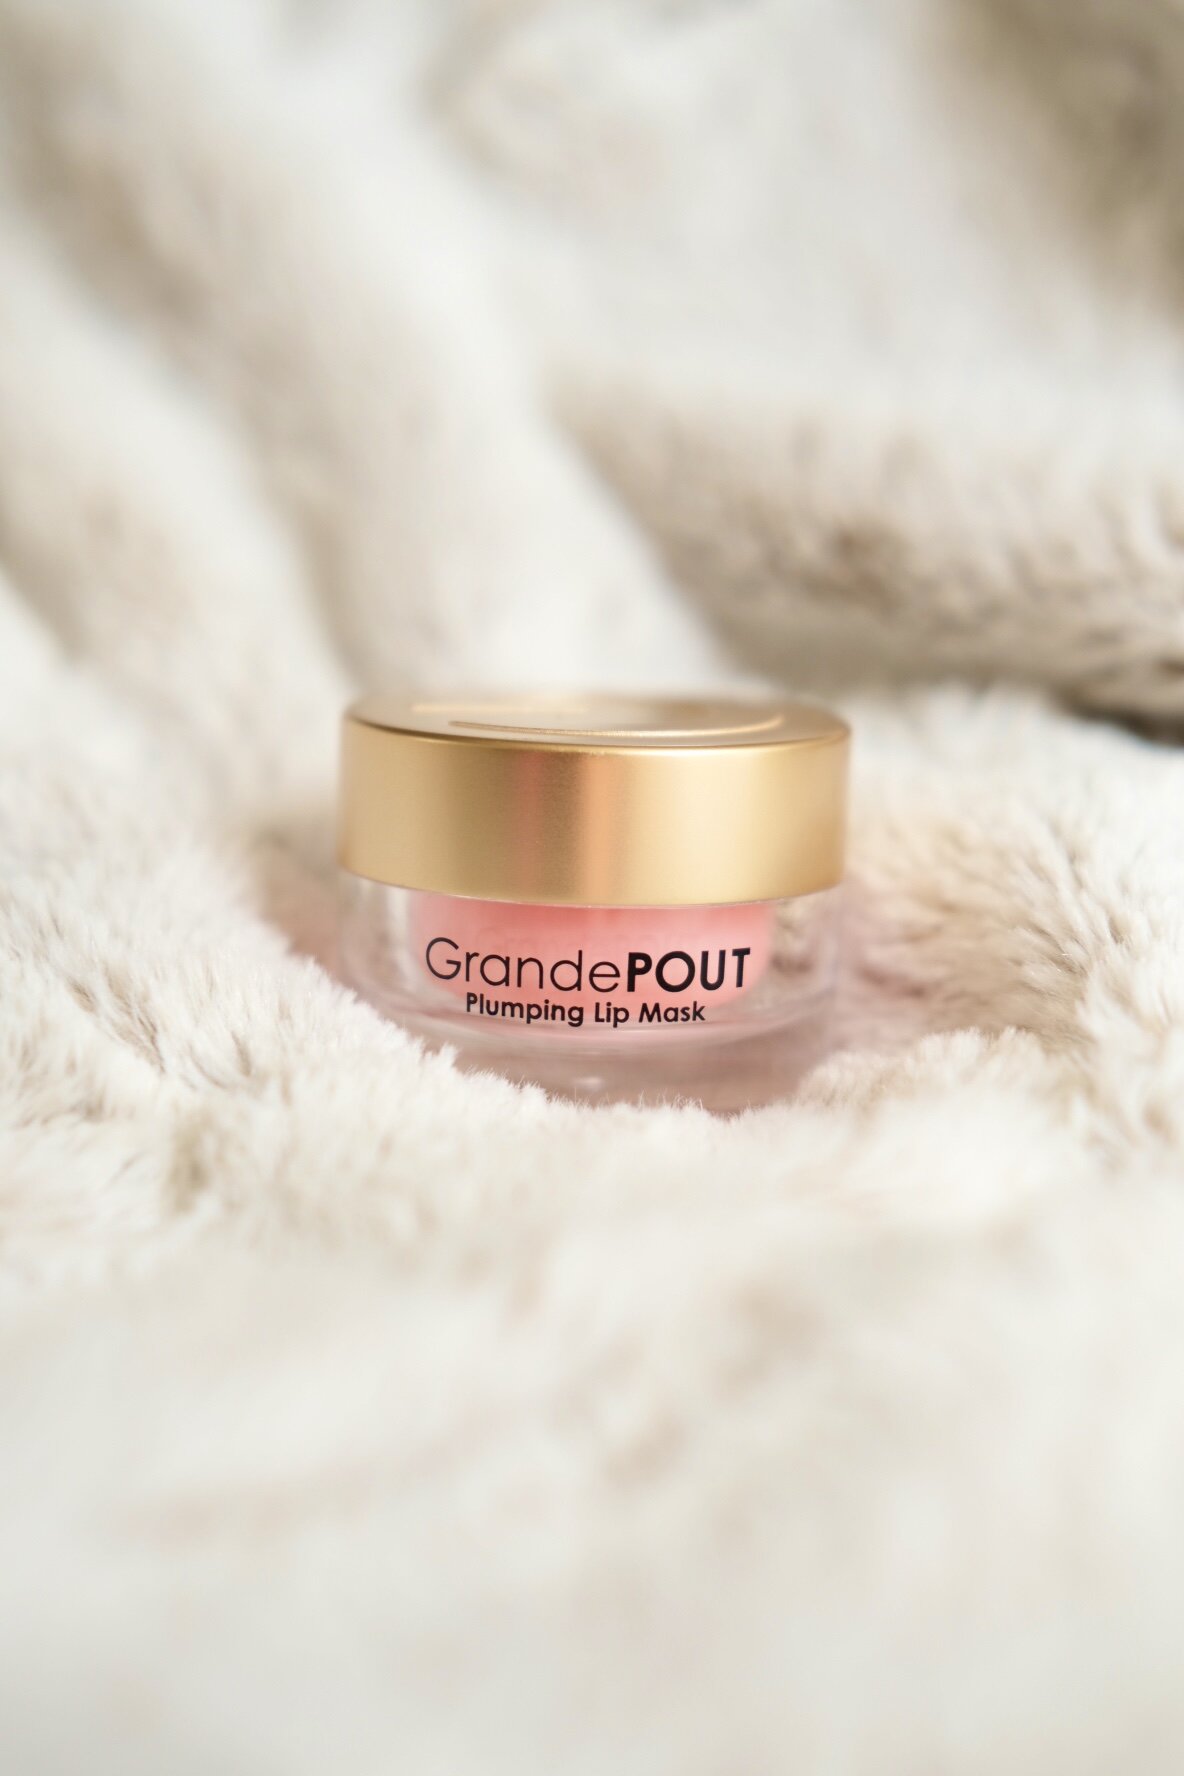 In this blog post, I am going to share my GrandePOUT review. GrandePOUT is the latest lip plumping product from Grande Cosmetics. In this GrandePOUT review, I will detail my results with GrandePOUT, my experience with other Grande Cosmetics products…